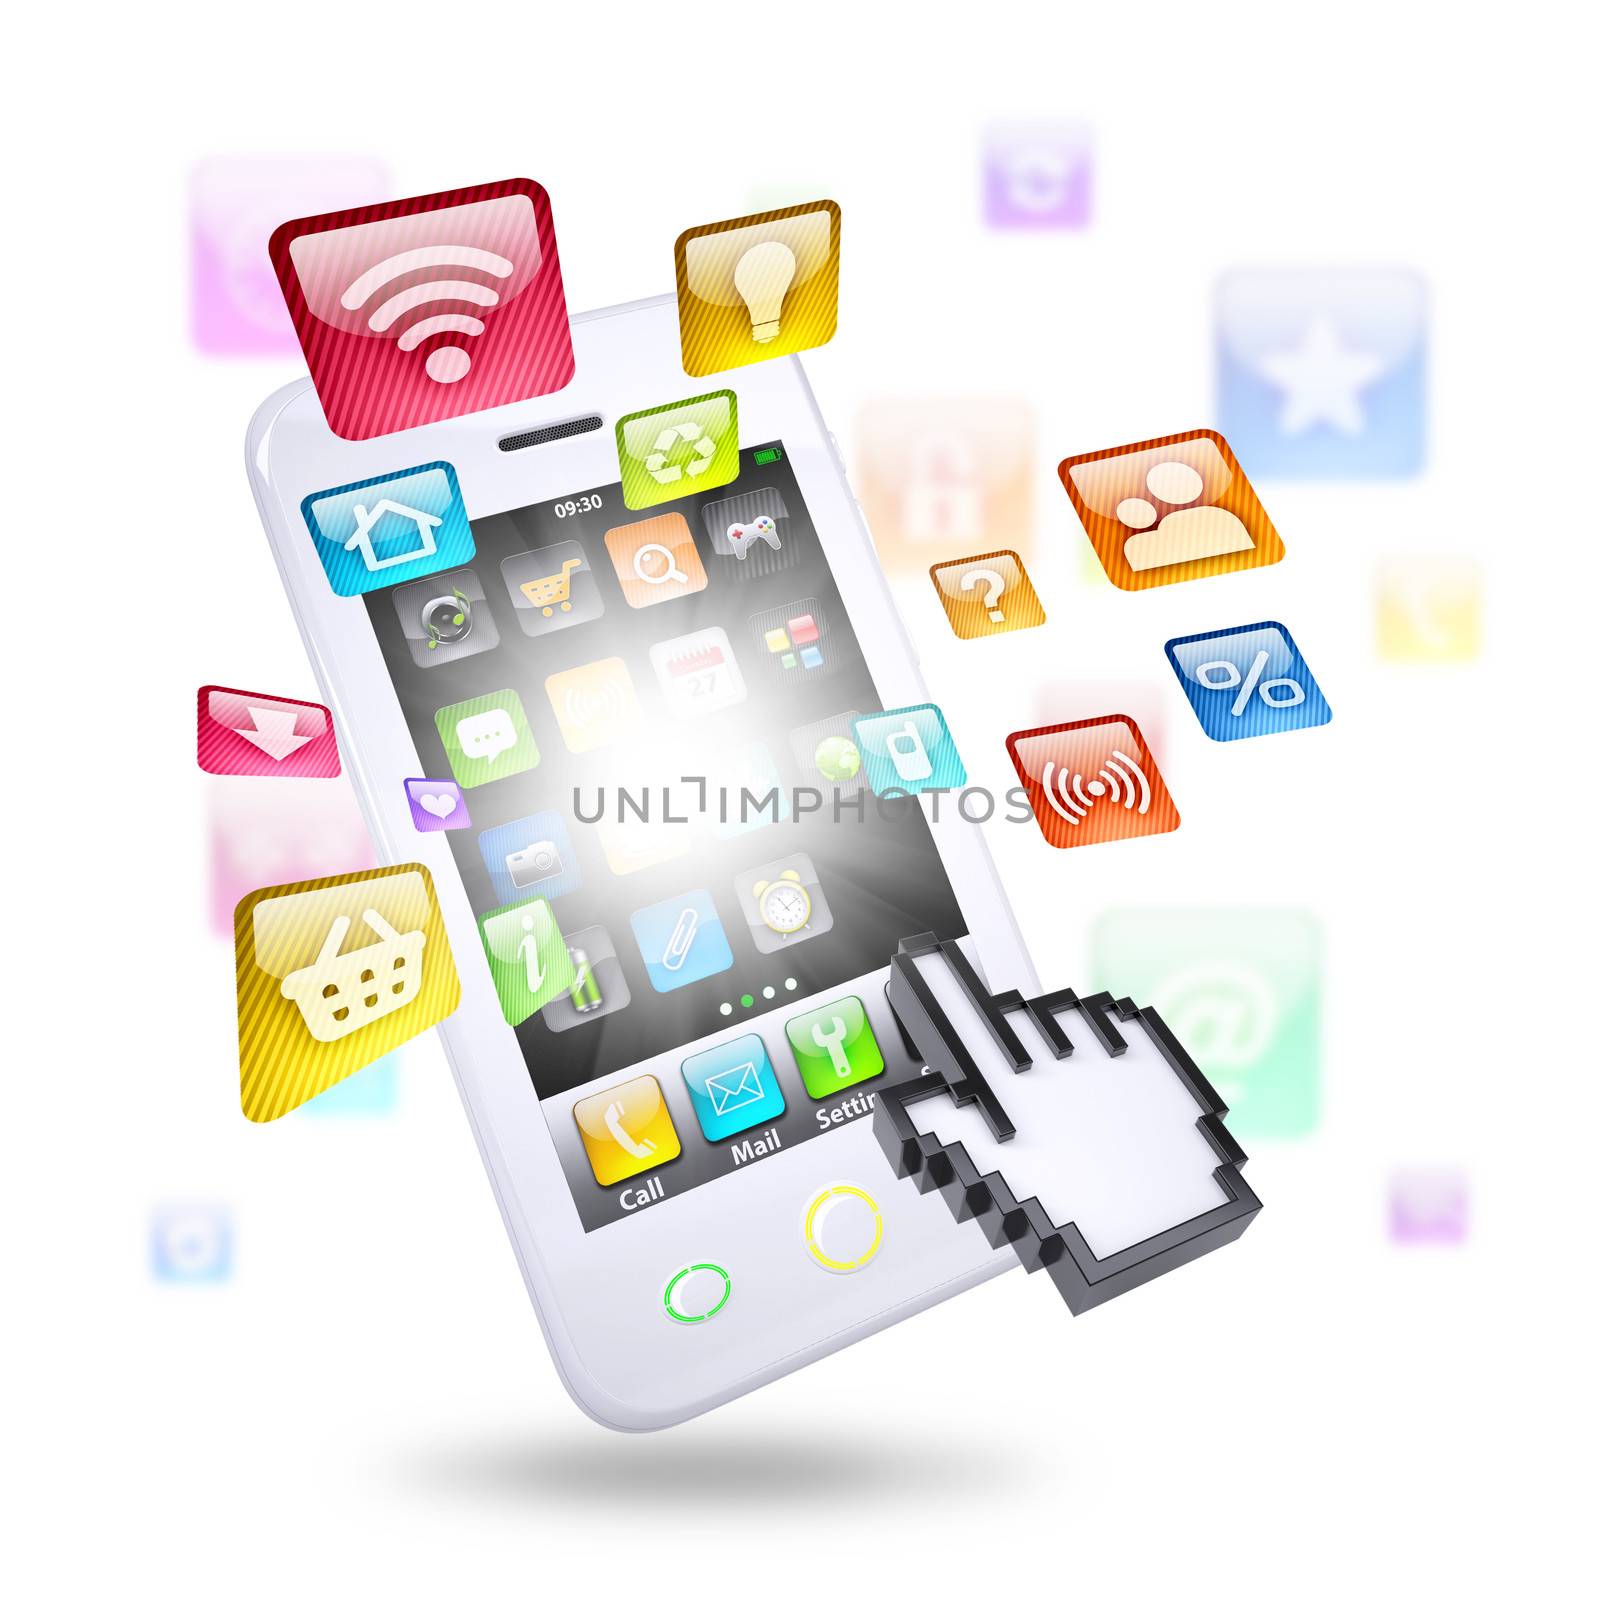 Smartphone and application icons. The concept of telecommunication technologies